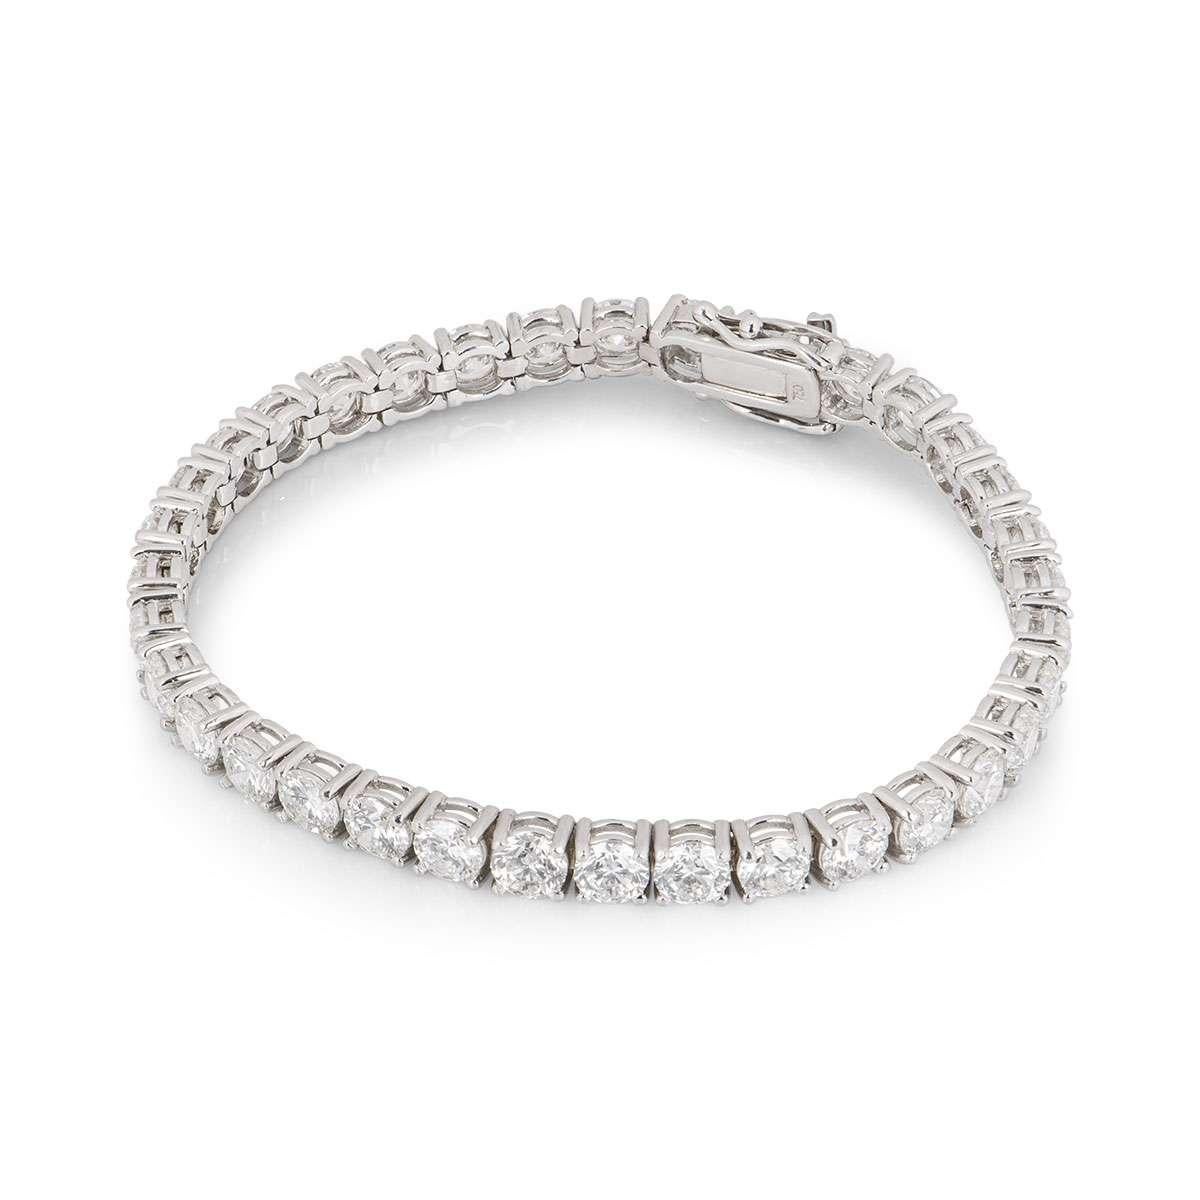 An elegant 18k white gold diamond line bracelet. The bracelet is composed of 35 claw set round brilliant cut diamonds totalling approximately 10.50ct. The diamonds are predominantly F-G colour and VS+ clarity. The bracelet measures 6.5 inches in